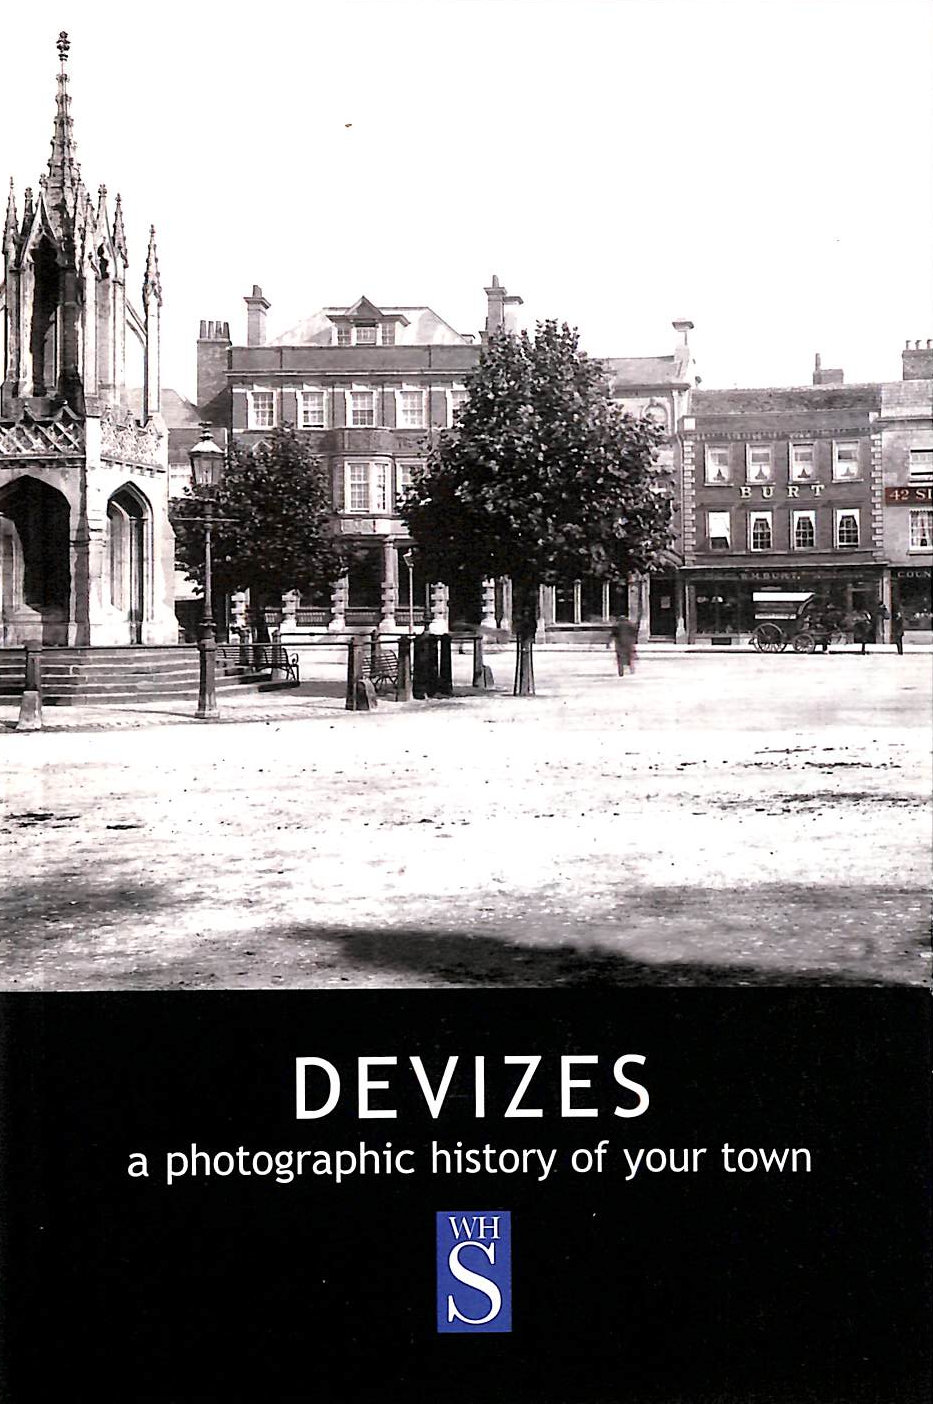 LA VARDERA, DEE - Devizes: A Photographic History Of Your Town